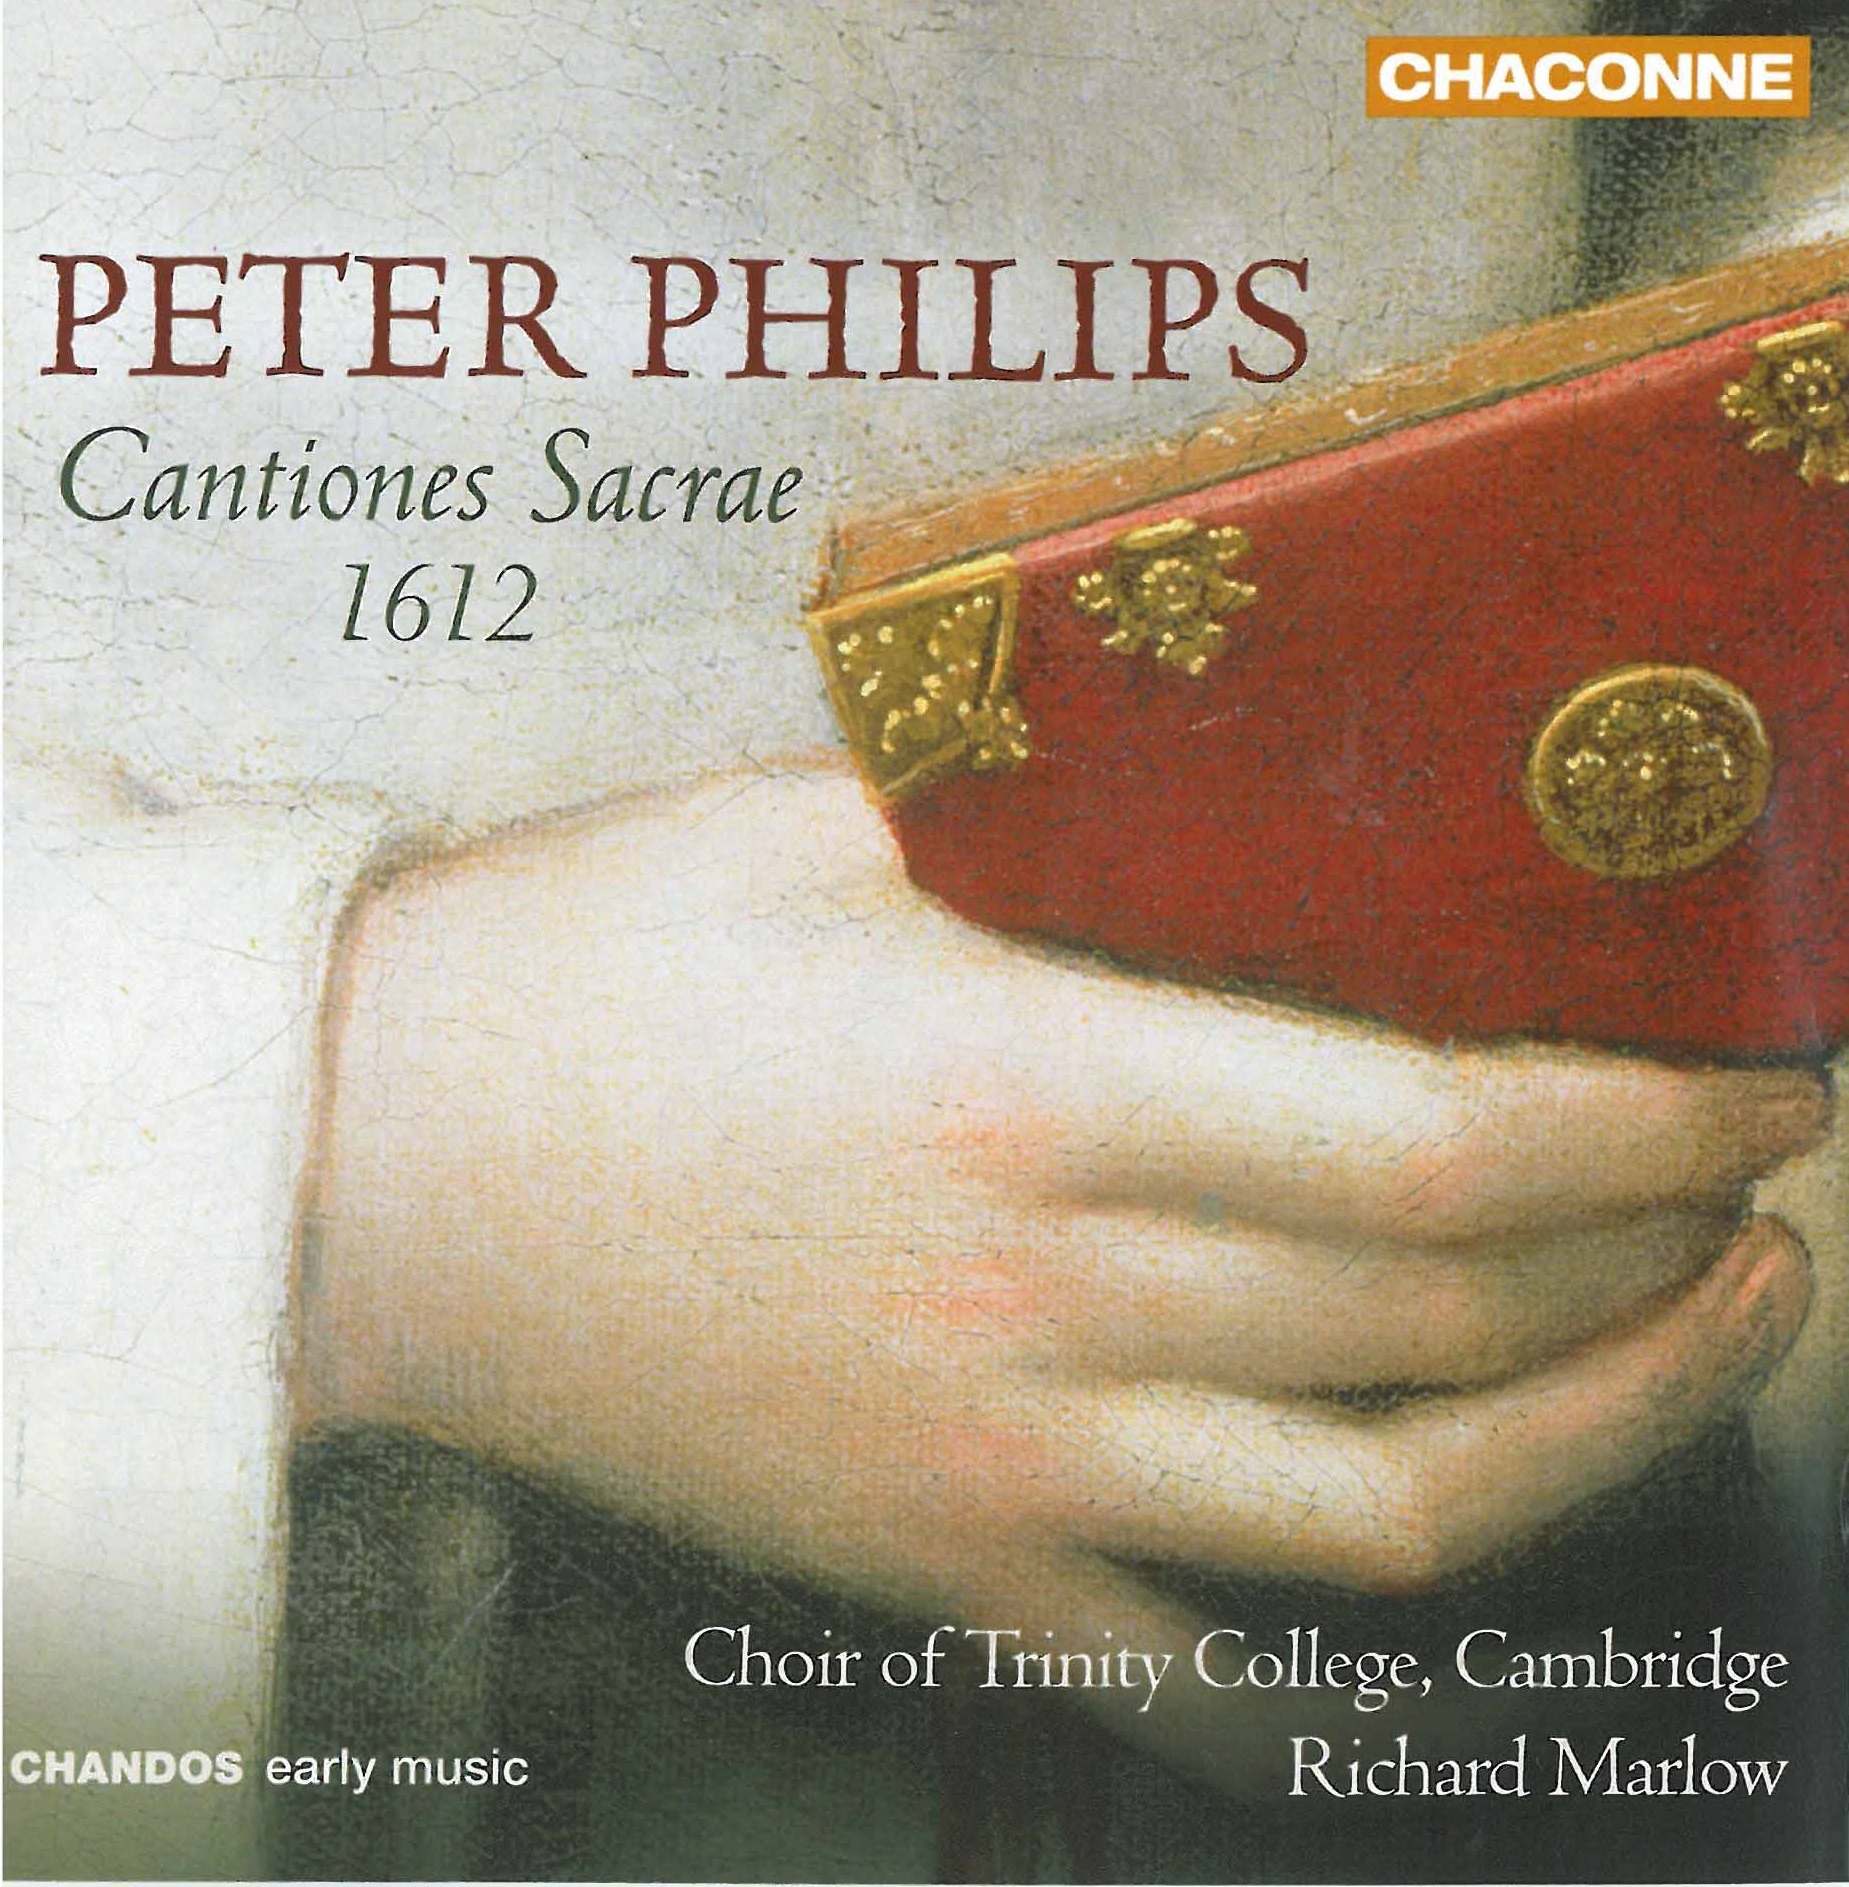 Peter Philips - Cantiones Sacrae 1612